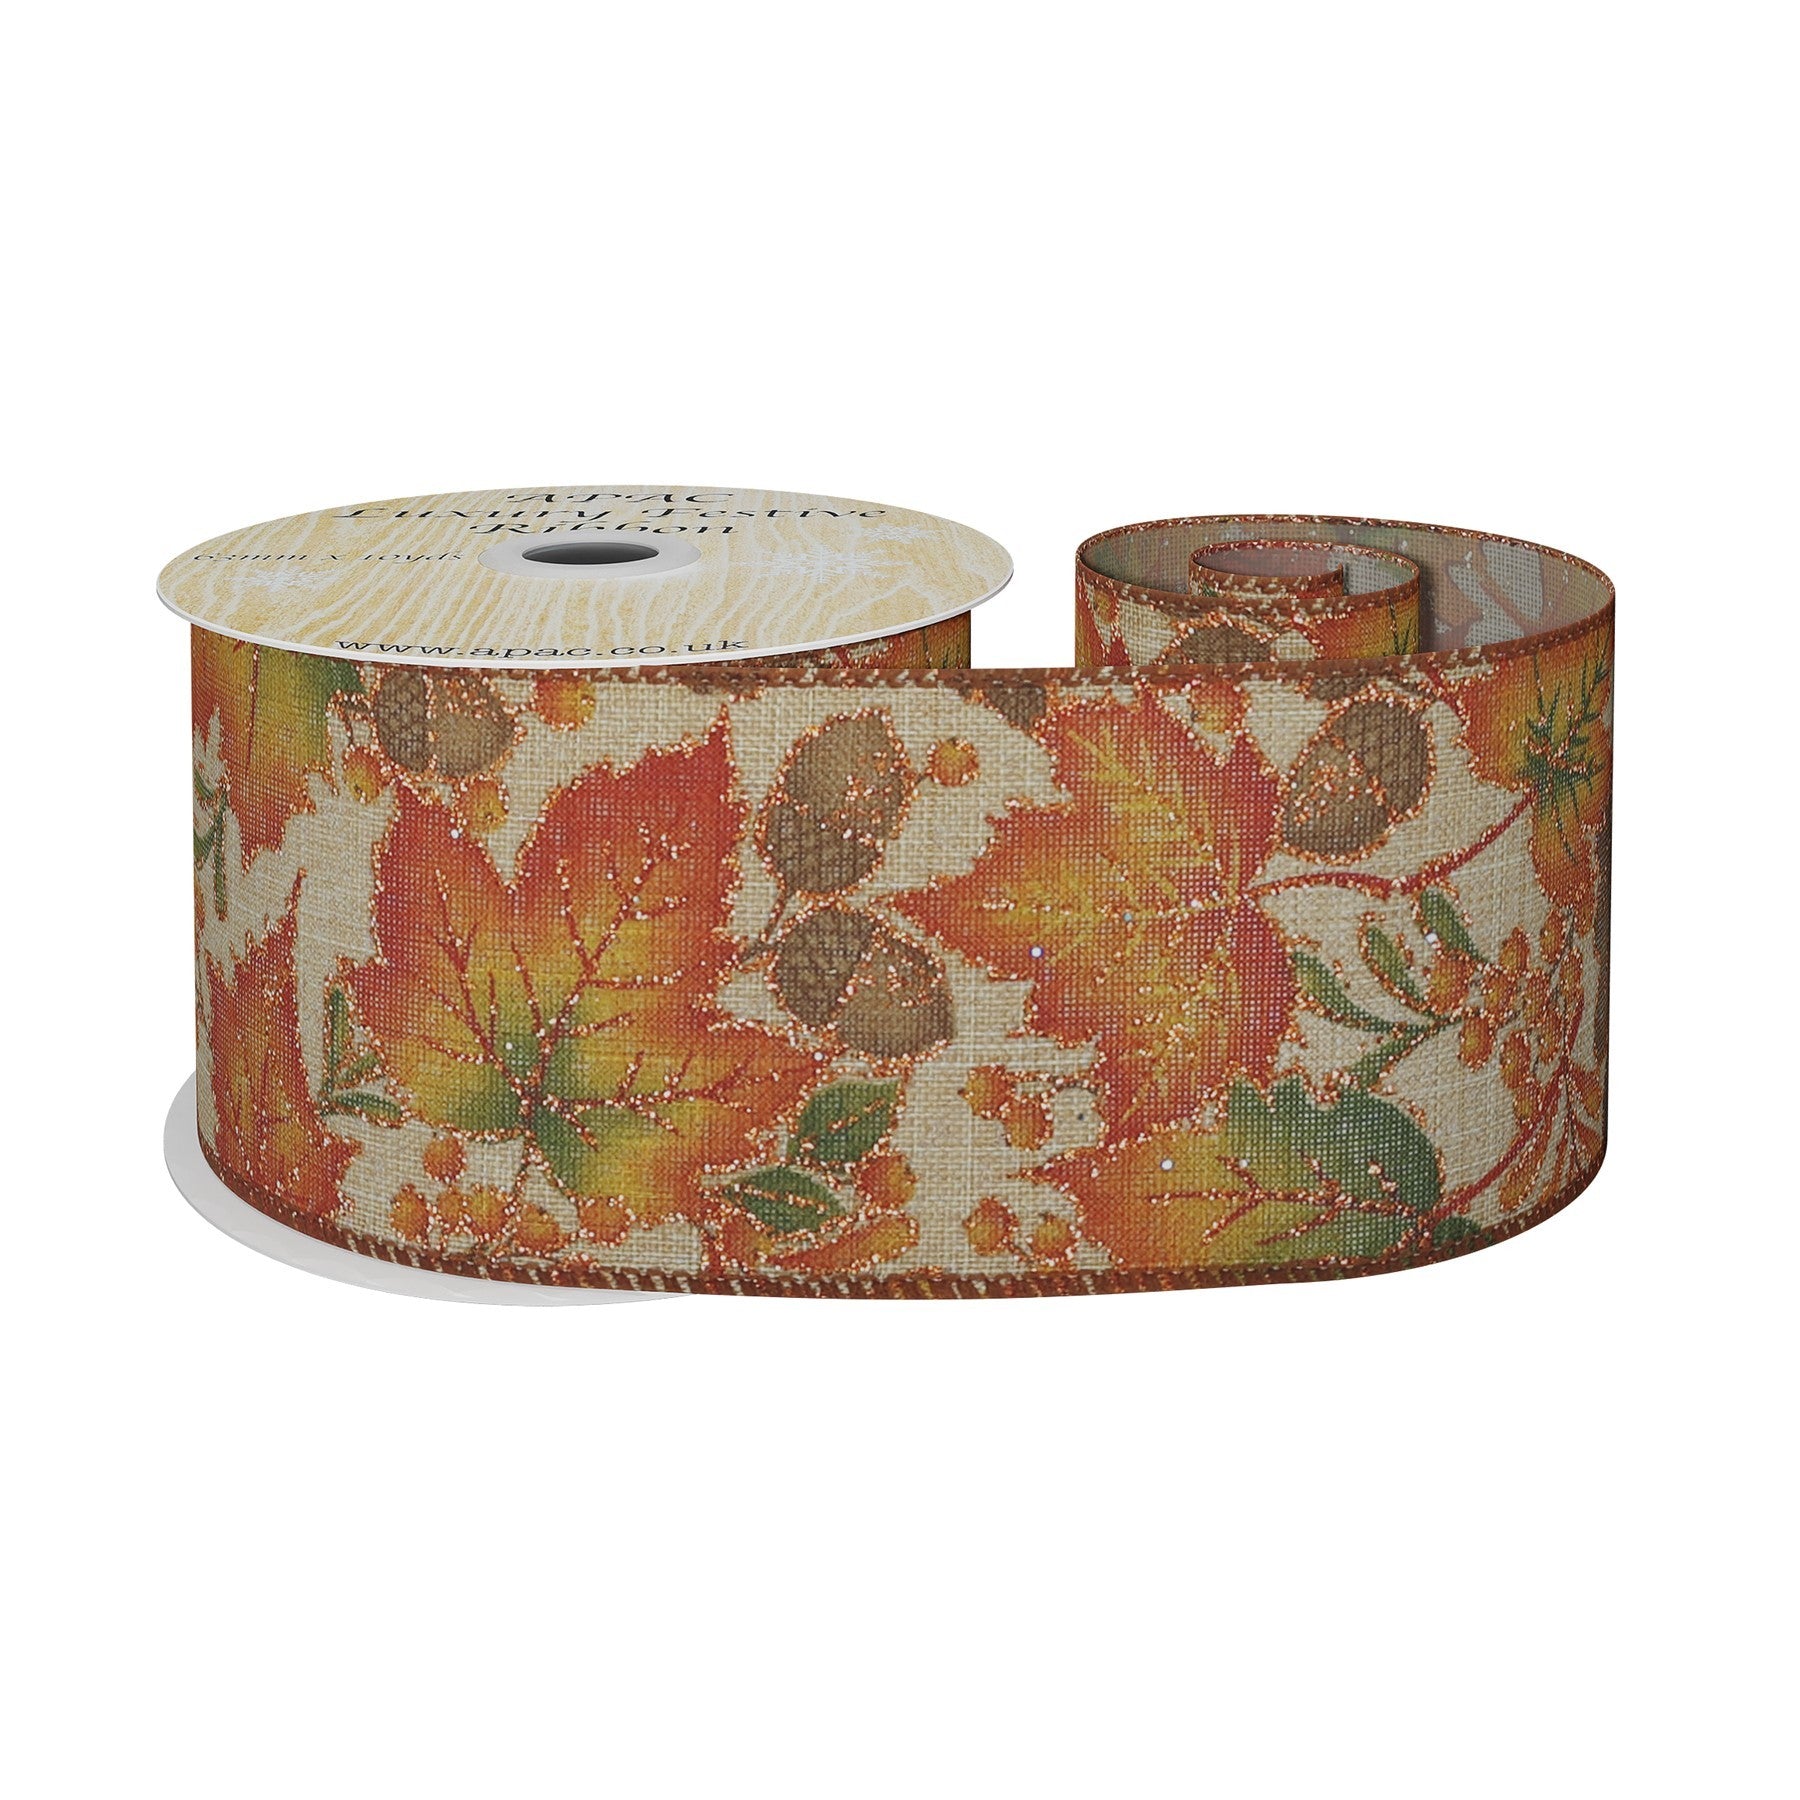 View Natural Wired Ribbon with Autumn Leaves and Acorns 63mm x 10 yards information